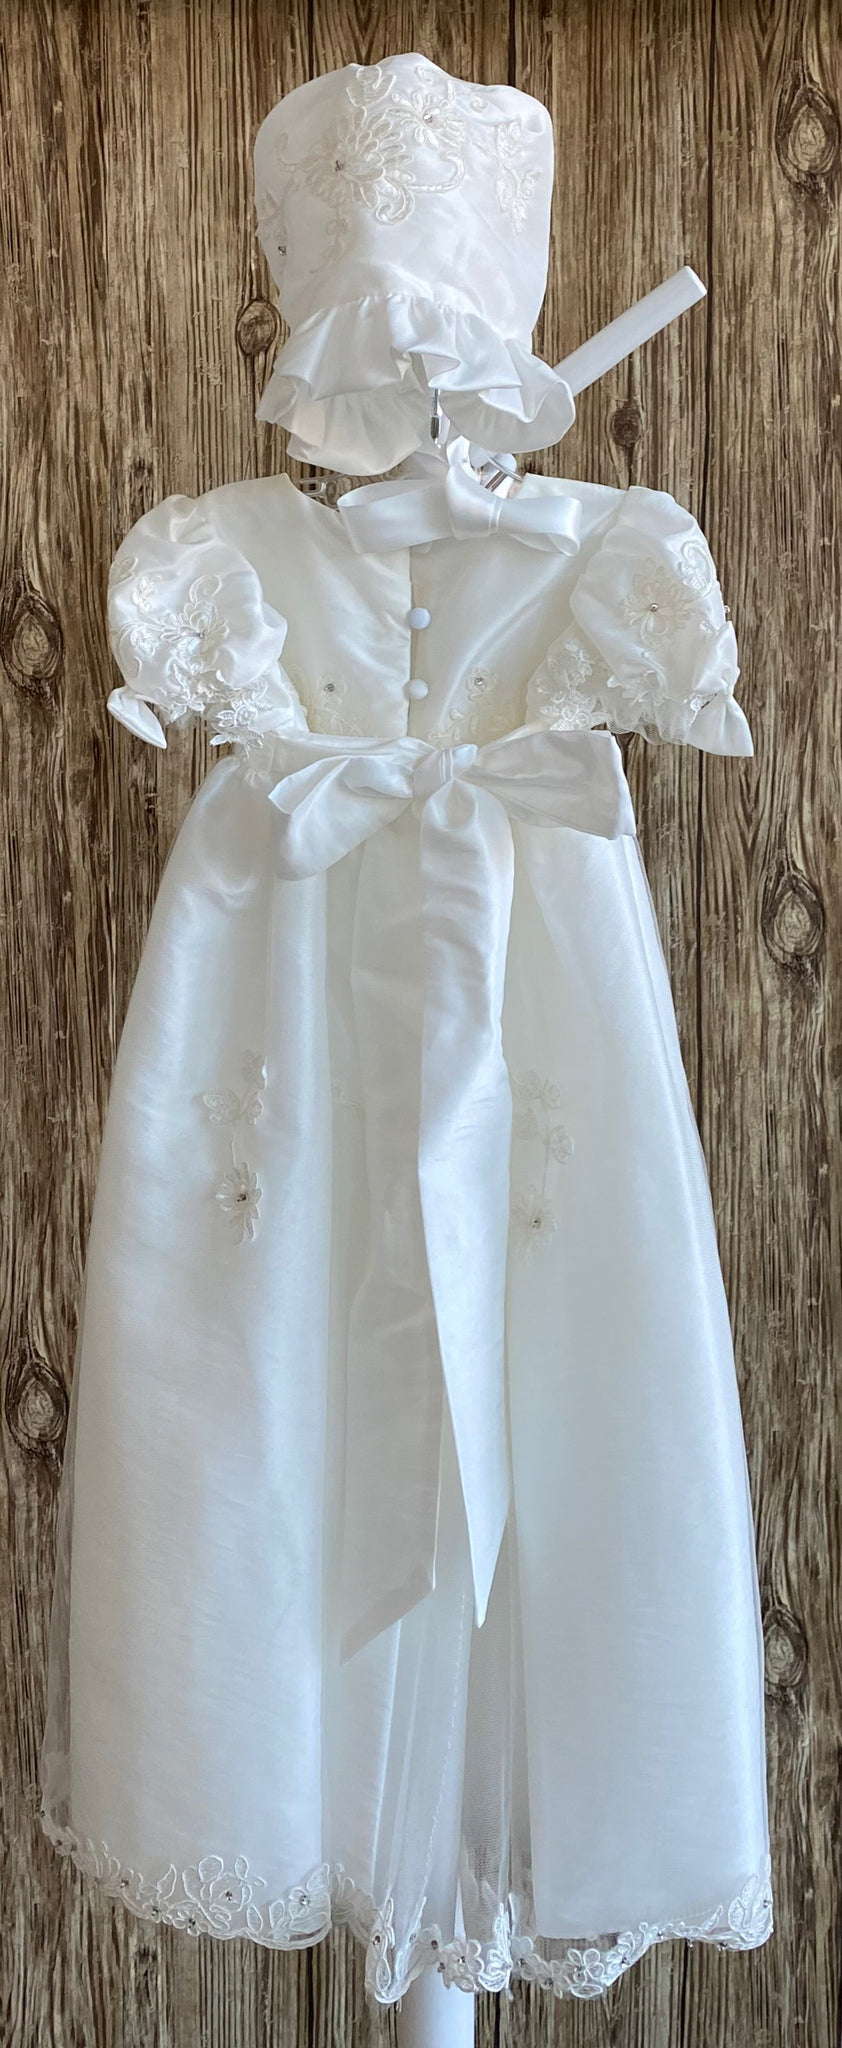 This a beautiful, one-of-a-kind baptism gown.  A lovely gown for a precious child.  Ivory, size 12M Satin bodice with embroidered floral overlay and rhinestone centers  Satin puff sleeve with embordered floral overlay tulle along arm hole Bow on both sleeves Gathered skirting around bodice Embroidered floral tulle overlay around skirting Beautiful flowered edge on skirt overlay Satin bonnet with embroidered flowers Gathered satin brim along bonnet Satin ribbon closure on bonnet